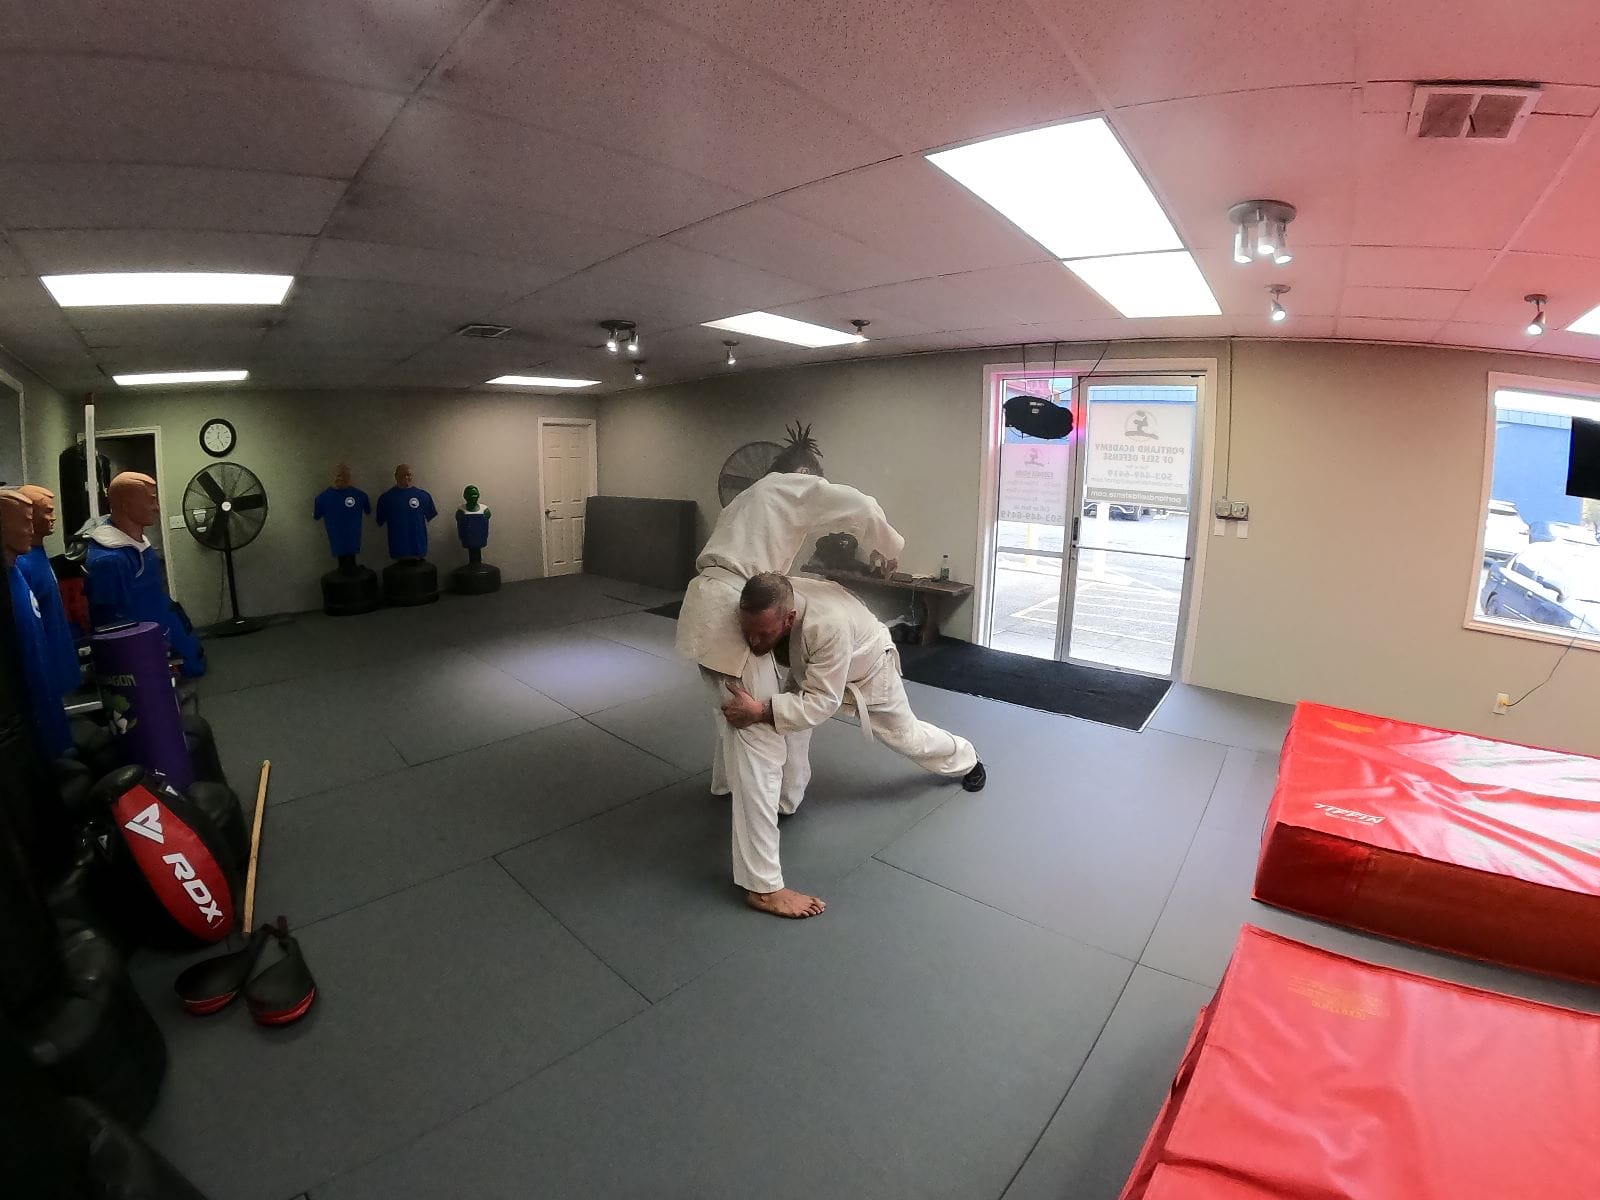 OUR ADULT SELF‑DEFENSE CLASSES ARE FUN, FUNCTIONAL AND INTENSIVE!